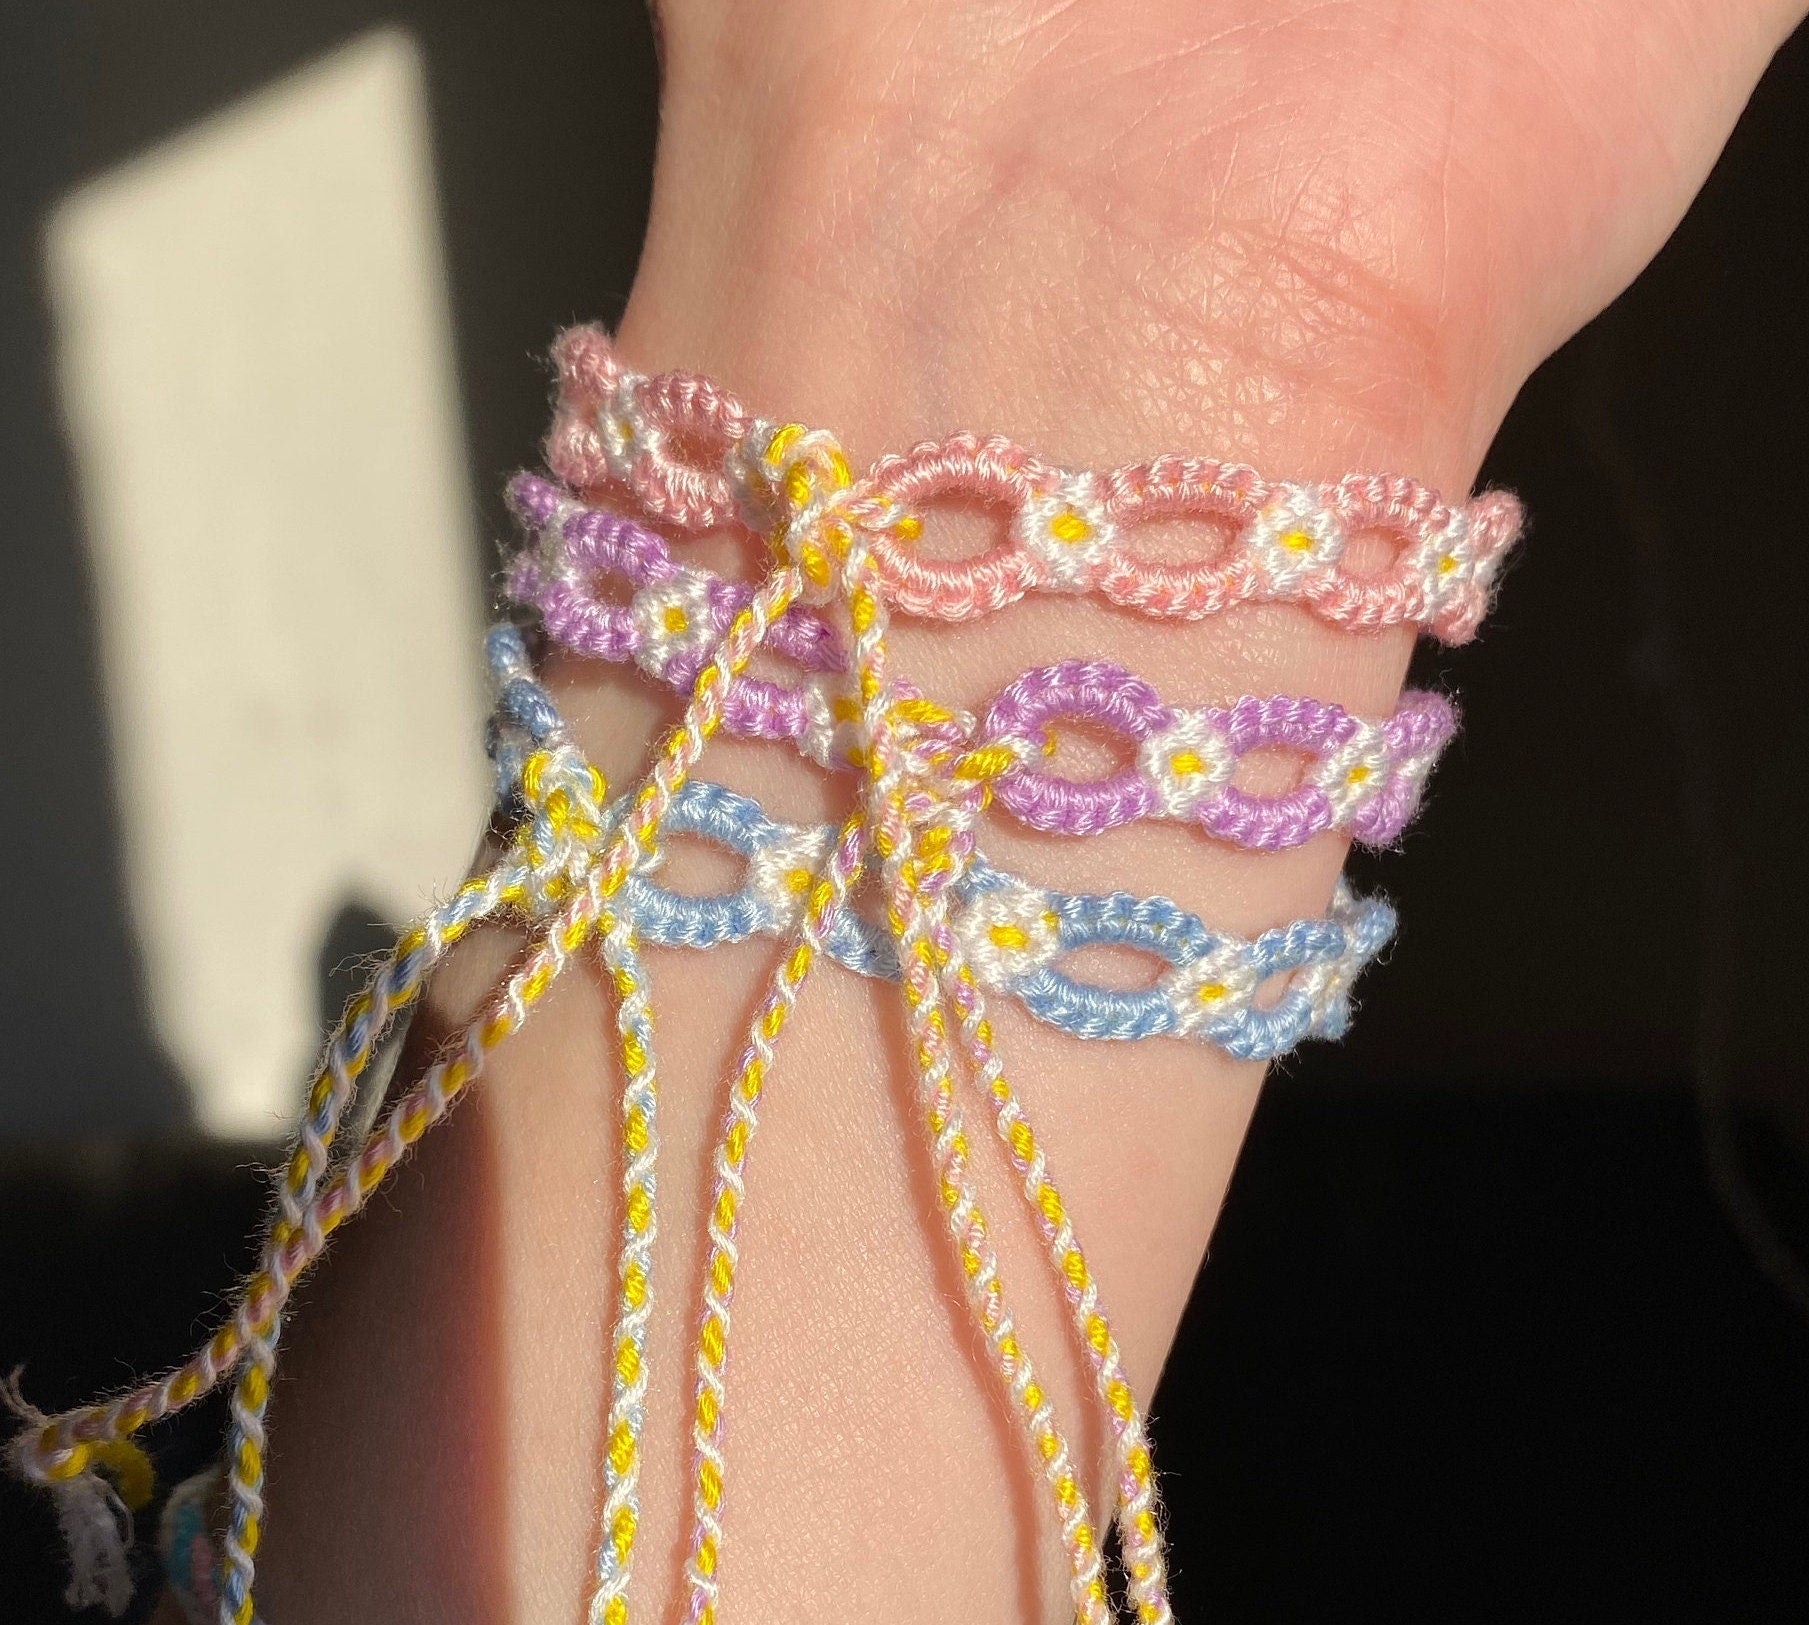 Light pink string bracelet with colourful beads and flowers